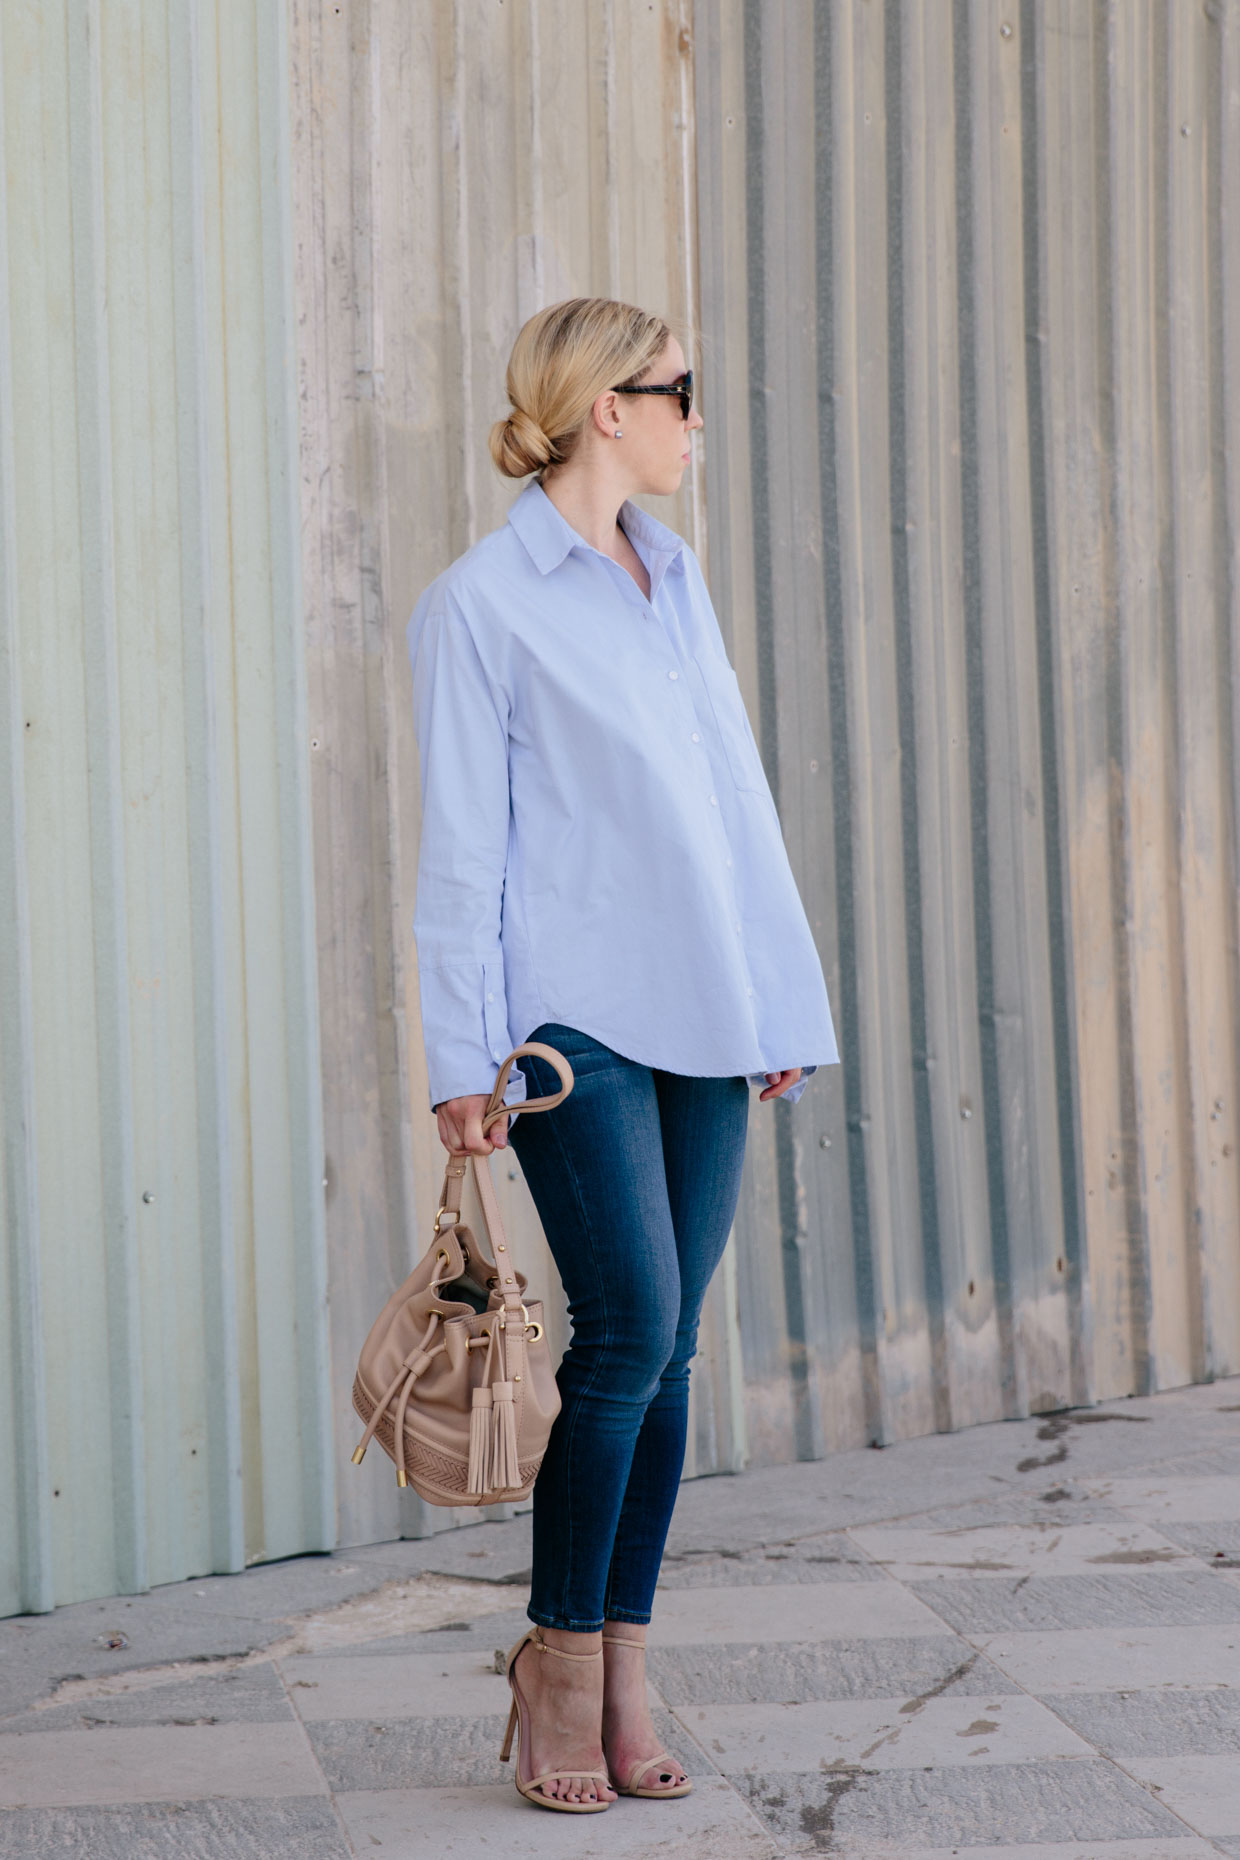 The Best Type of Non-Maternity Shirt to Wear During Pregnancy - Meagan's  Moda